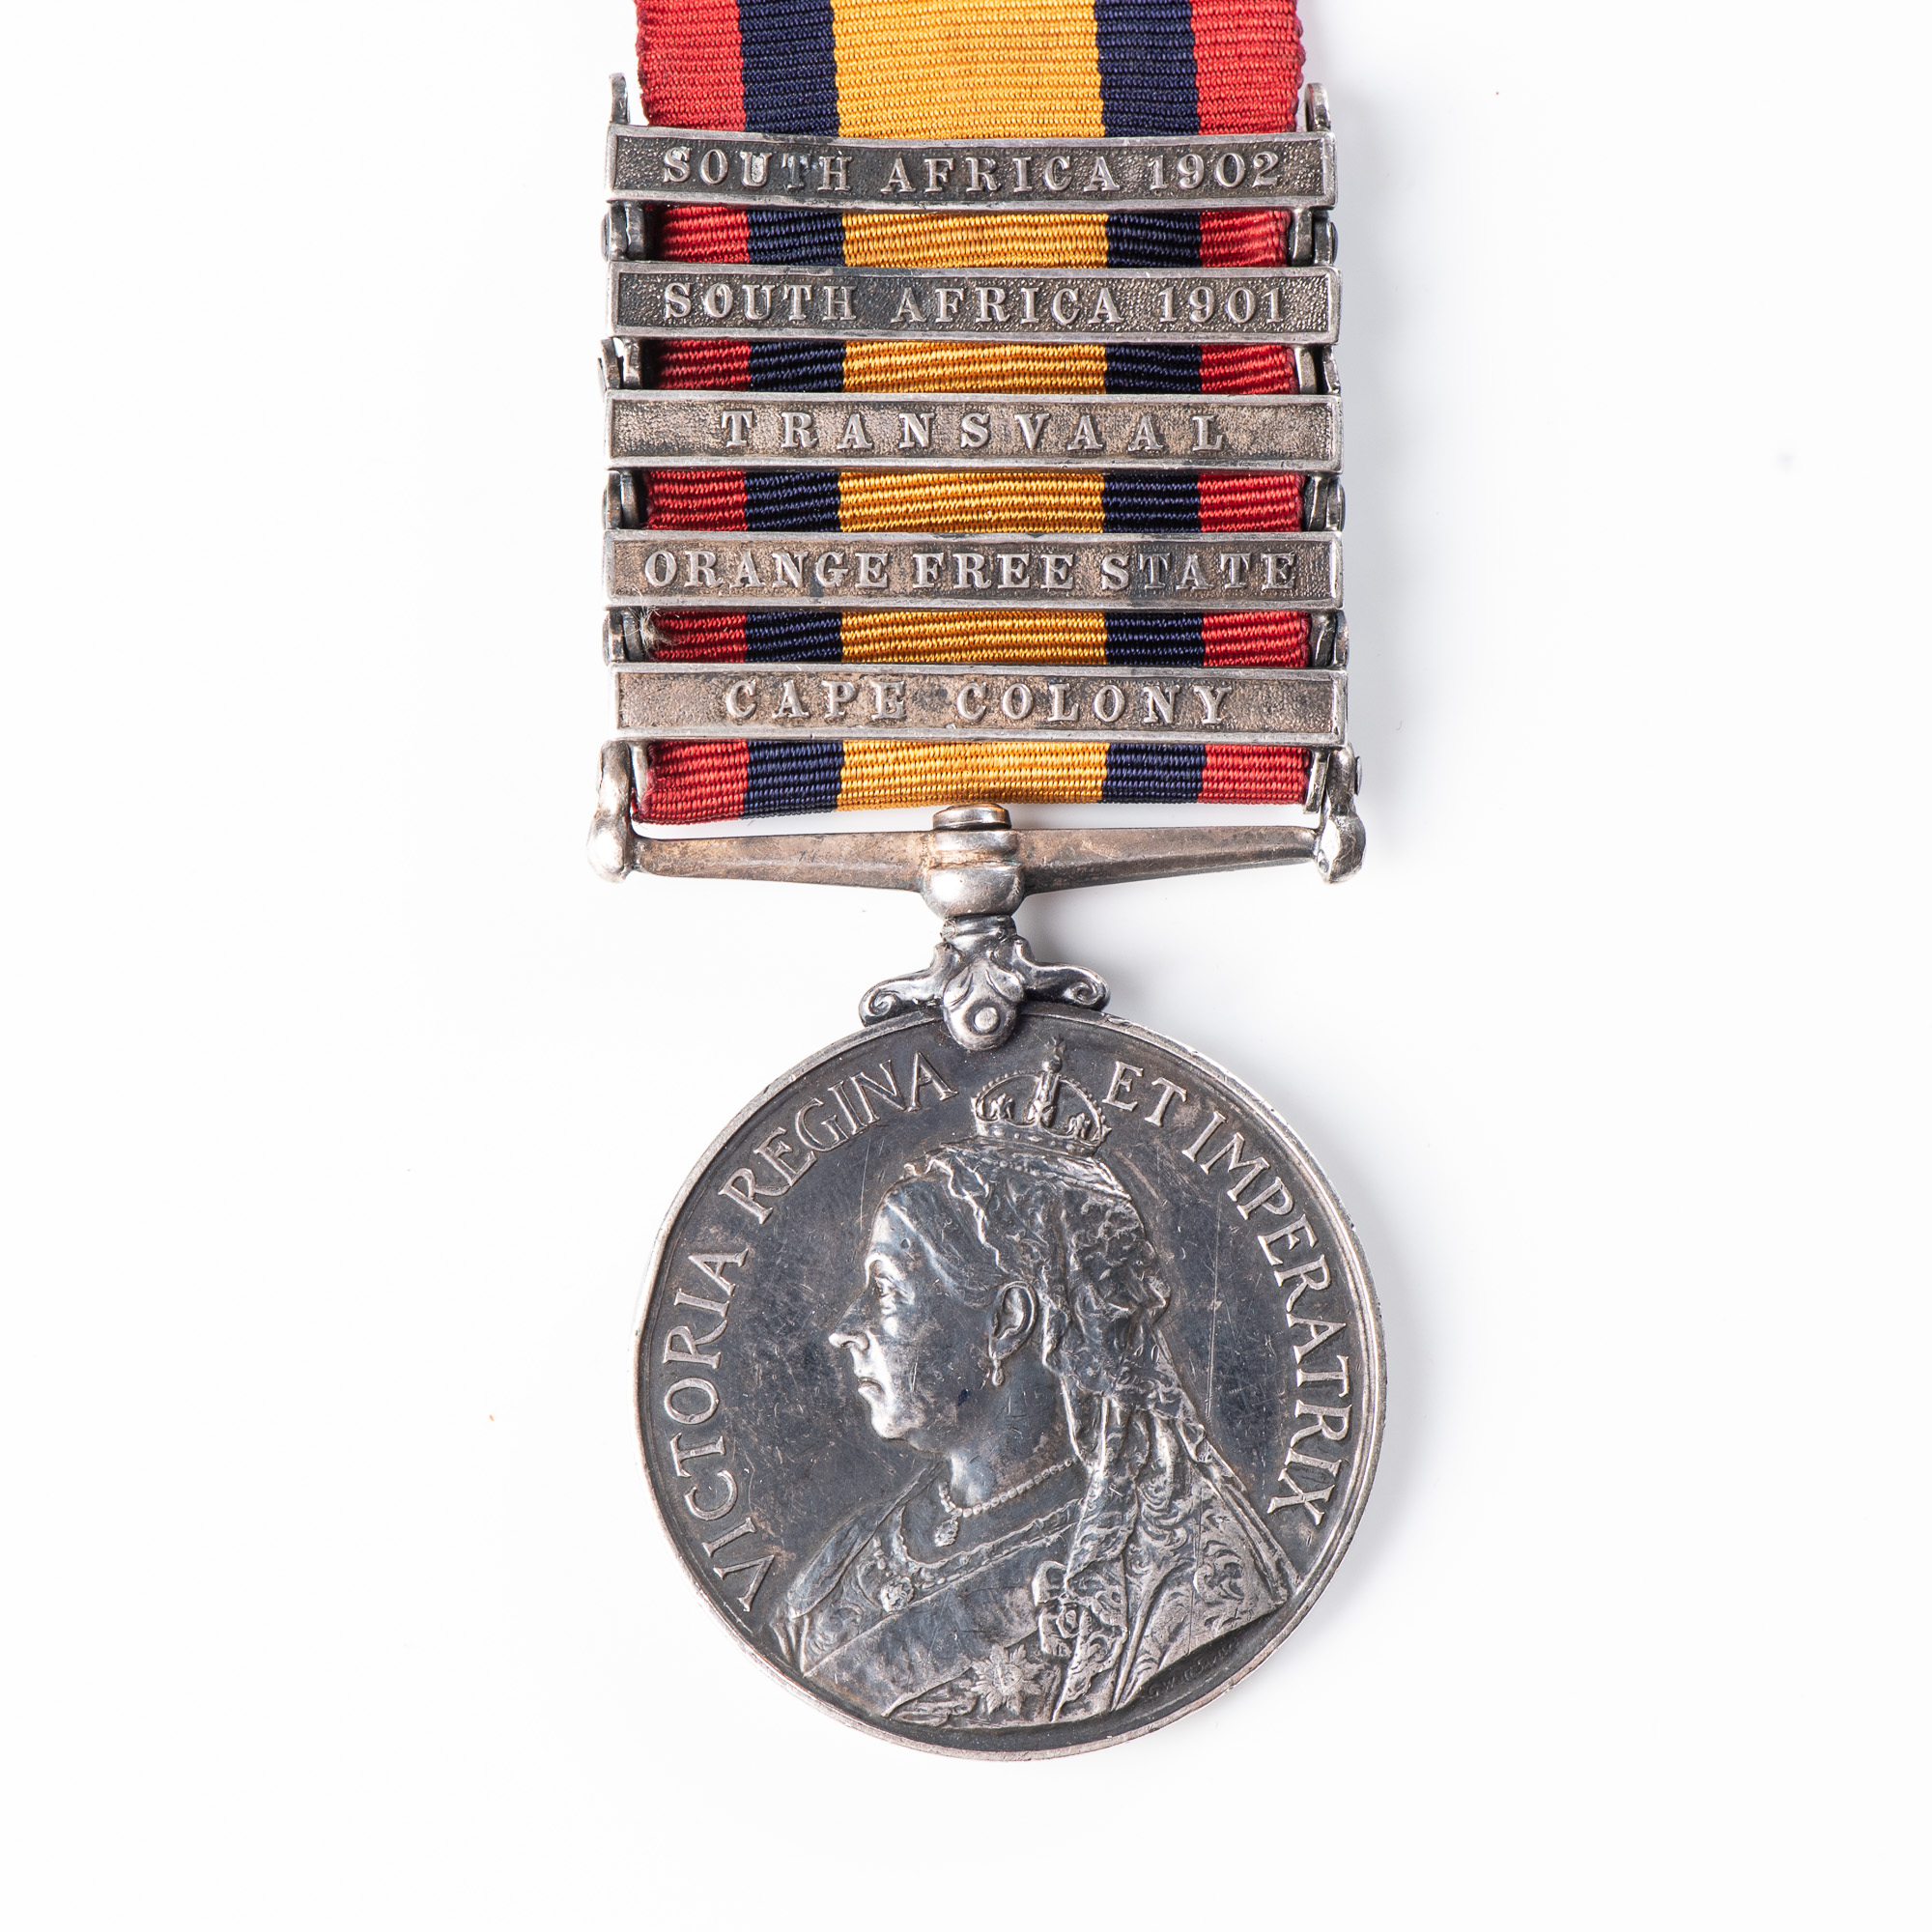 BOER WAR QUEEN'S SOUTH AFRICA MEDAL TO SOUTH AFRICAN CONSTABULARY